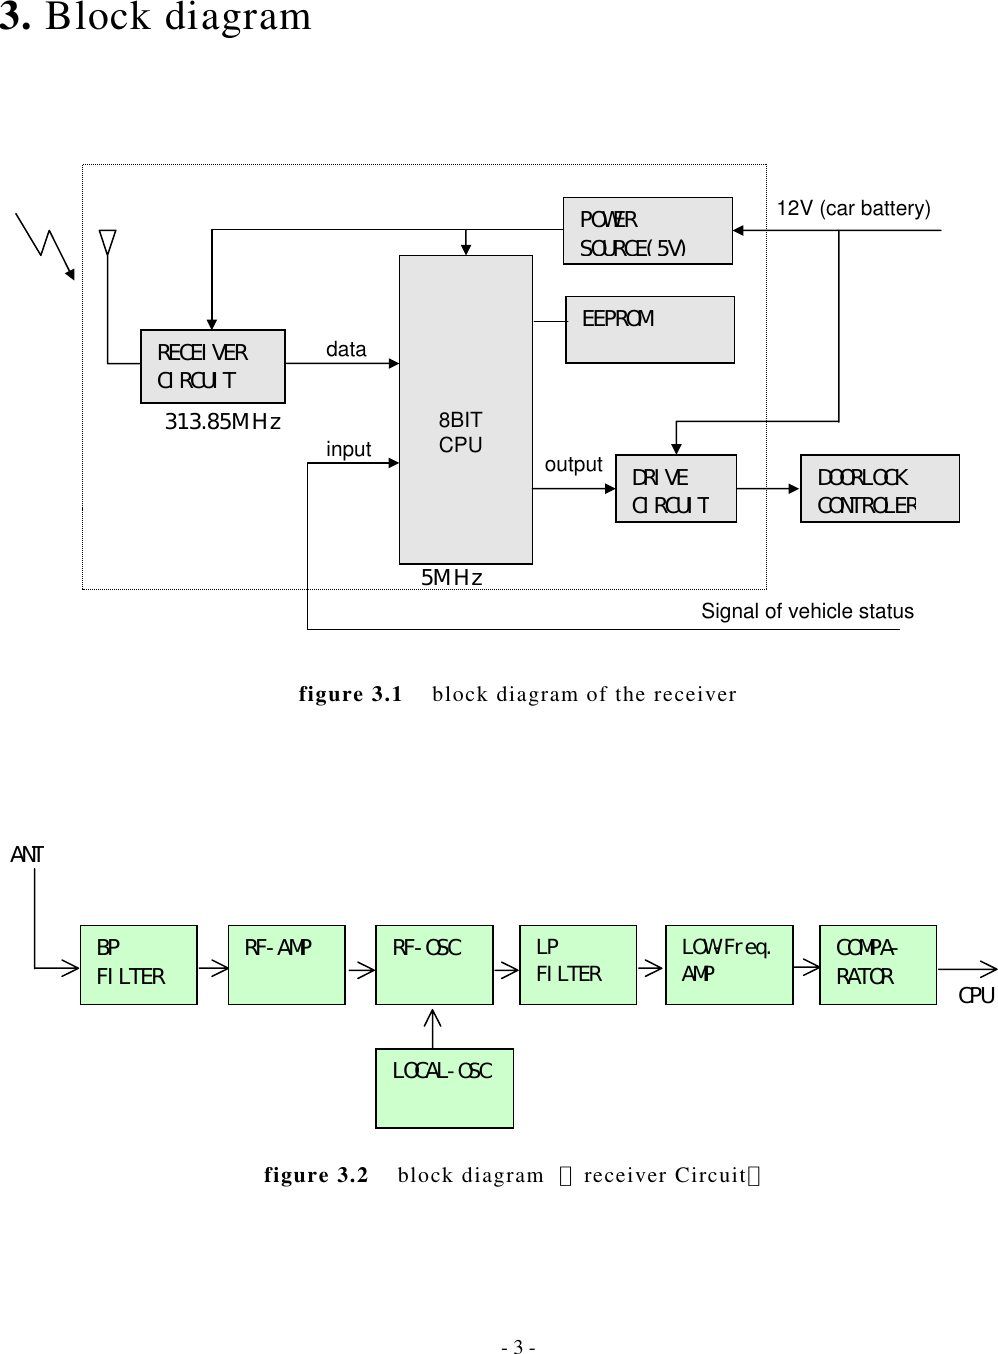   3. Block diagram         8BITCPURECEIVER CIRCUIT POWER SOURCE(5V)data DOORLOCK CONTROLERSignal of vehicle status input output12V (car battery)5MHz 313.85MHz EEPROM DRIVE CIRCUIT               figure 3.1    block diagram of the receiver     ANT  COMPA- RATOR LOW-Freq. AMP LOCAL-OSCLP  FILTER RF-OSC RF-AMP BP  FILTER CPU         figure 3.2  block diagram （receiver Circuit）  - 3 - 